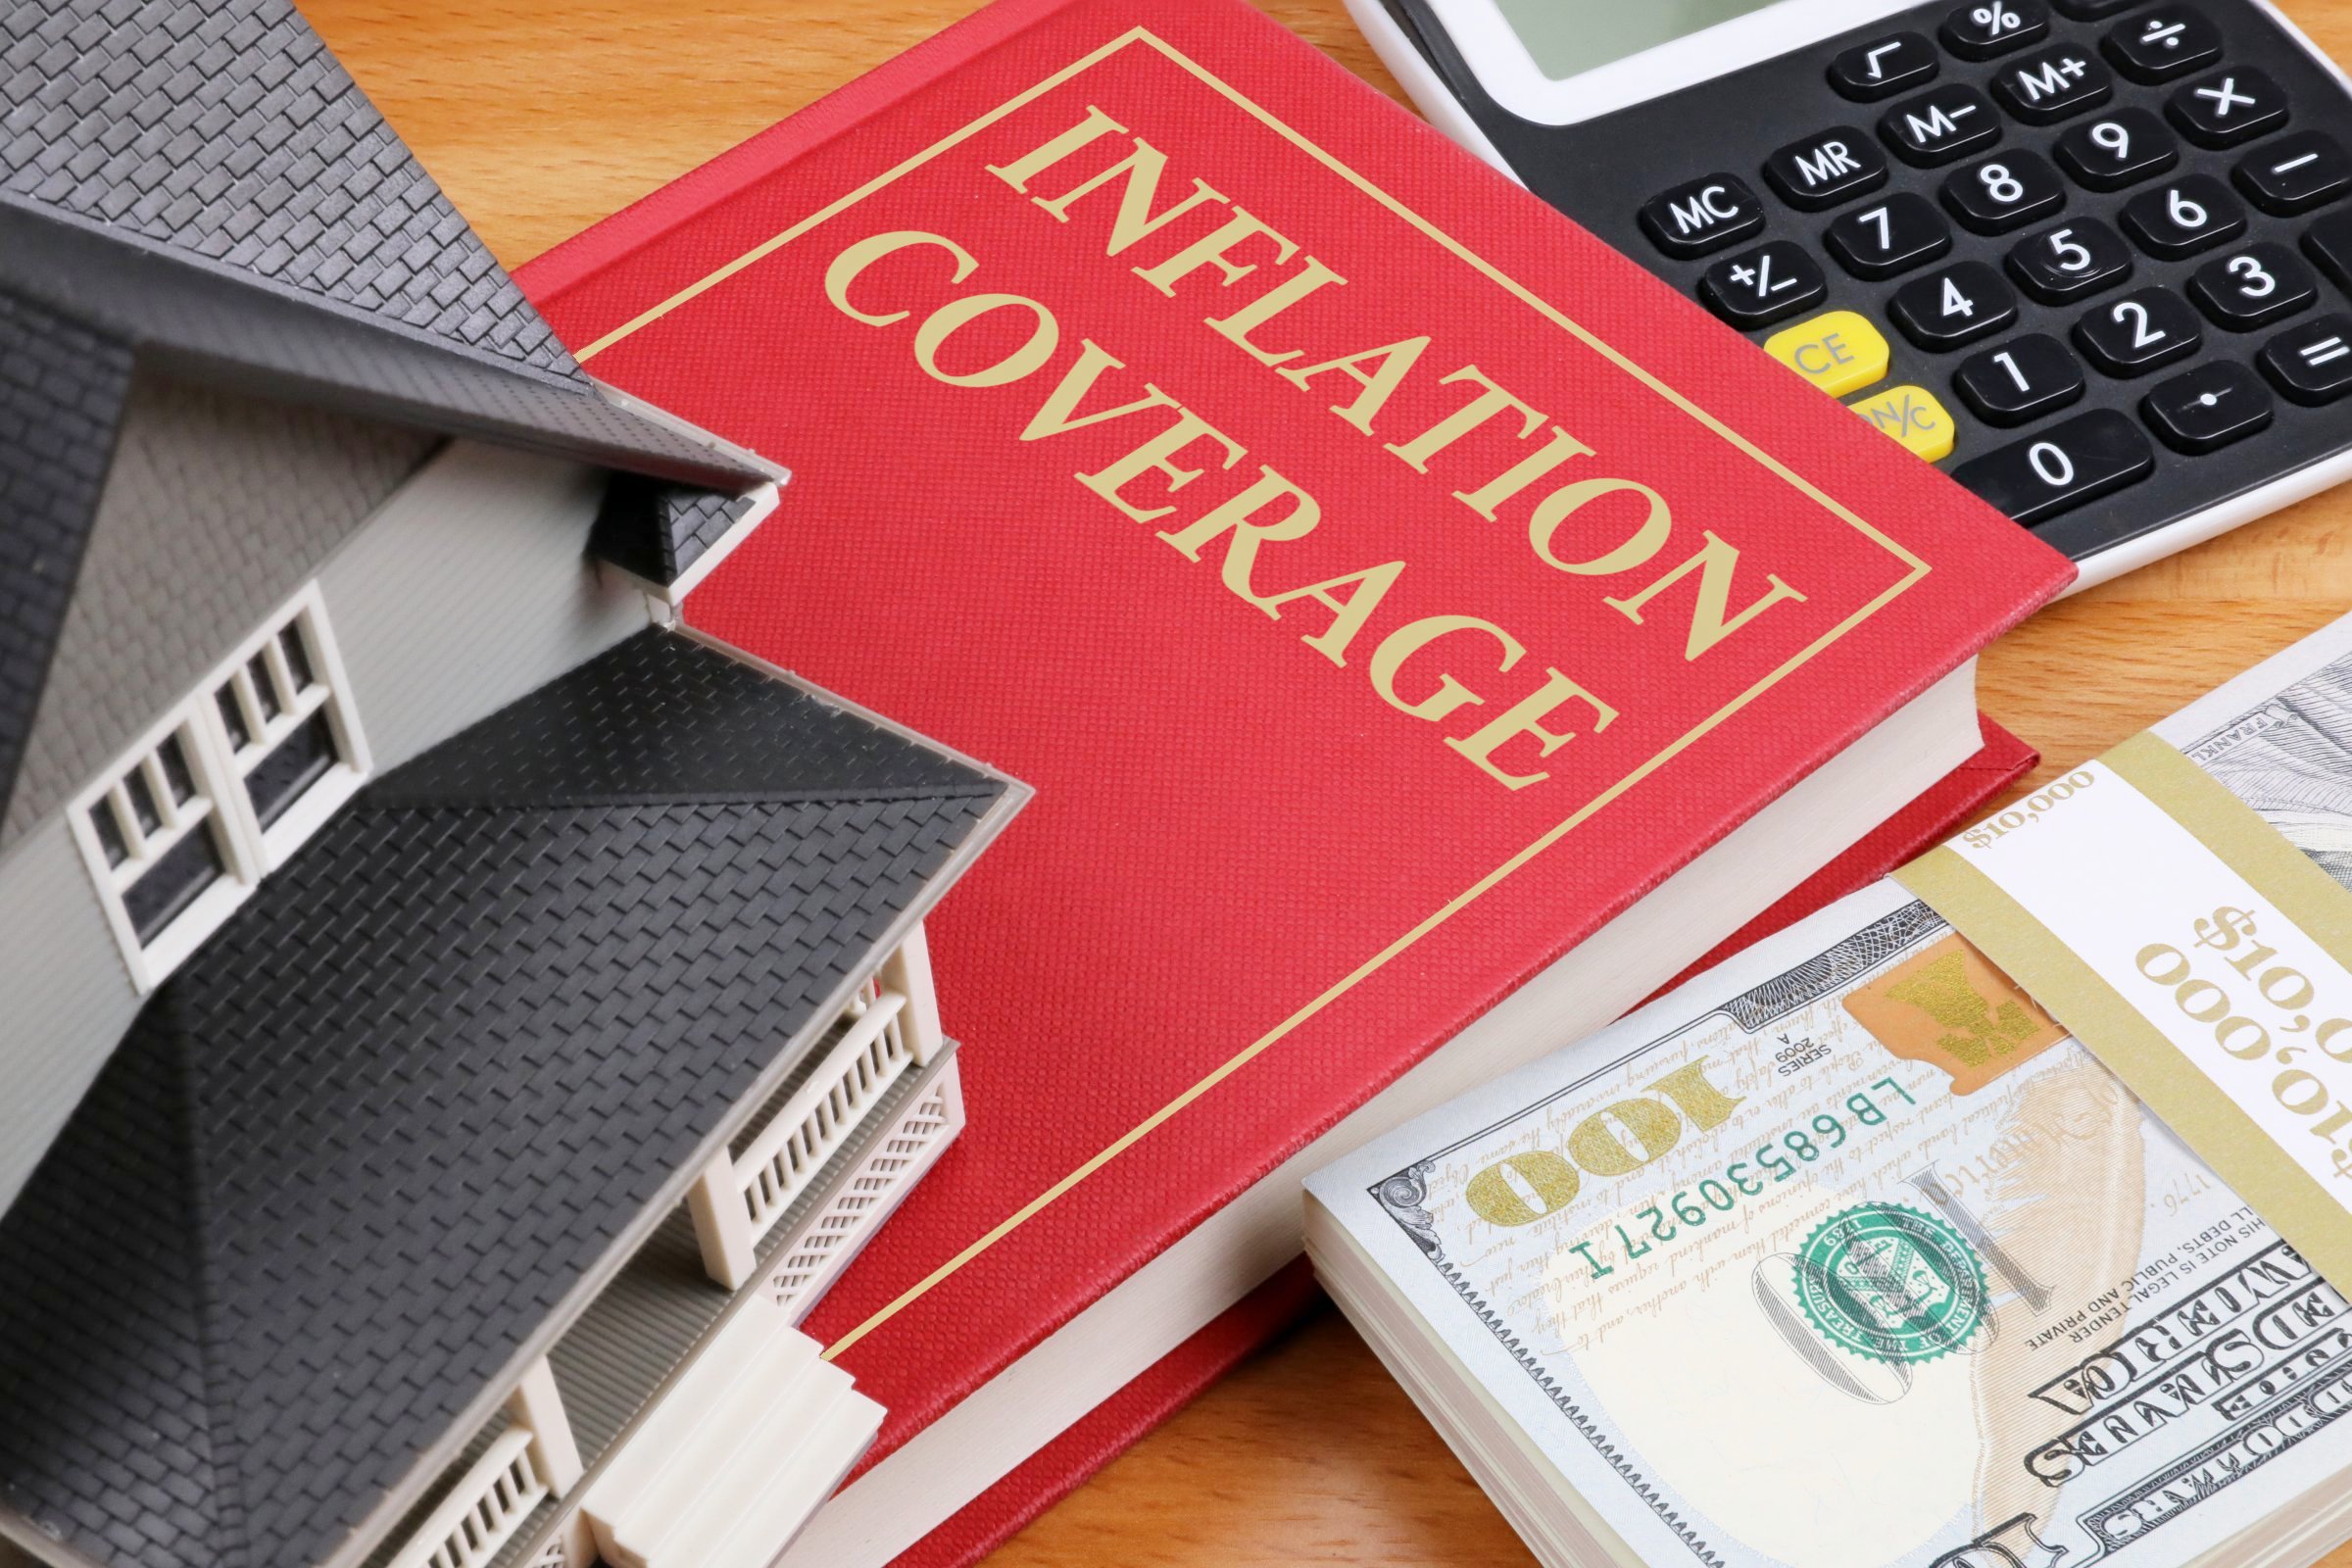 inflation coverage